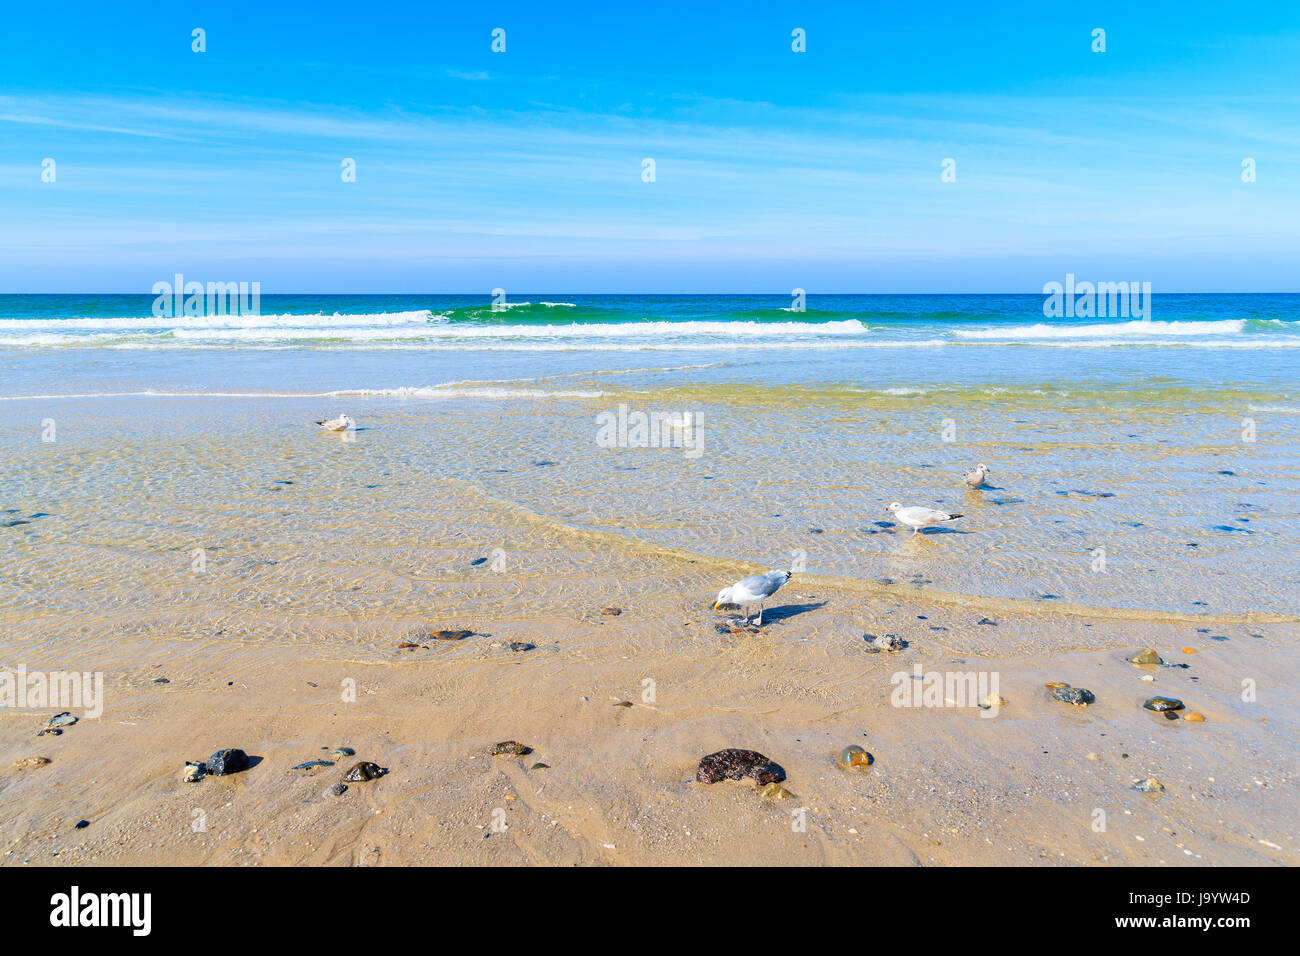 Seagulls in water on Kampen beach, Sylt island, North Sea, Germany Stock Photo